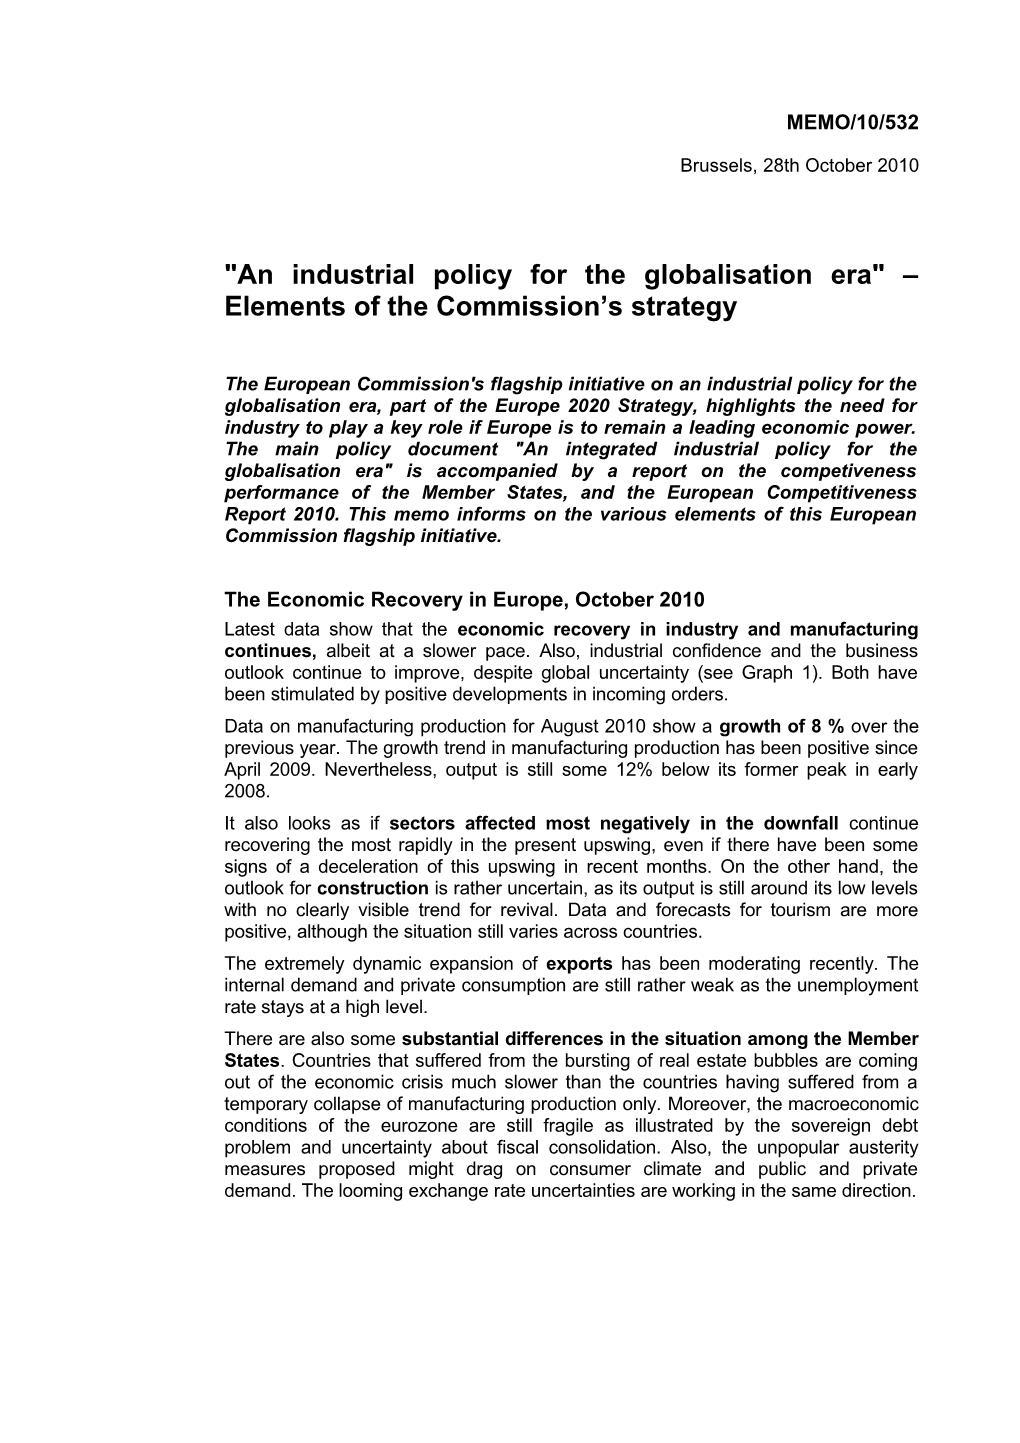 An Industrial Policy for the Globalisation Era Elements of the Commission S Strategy